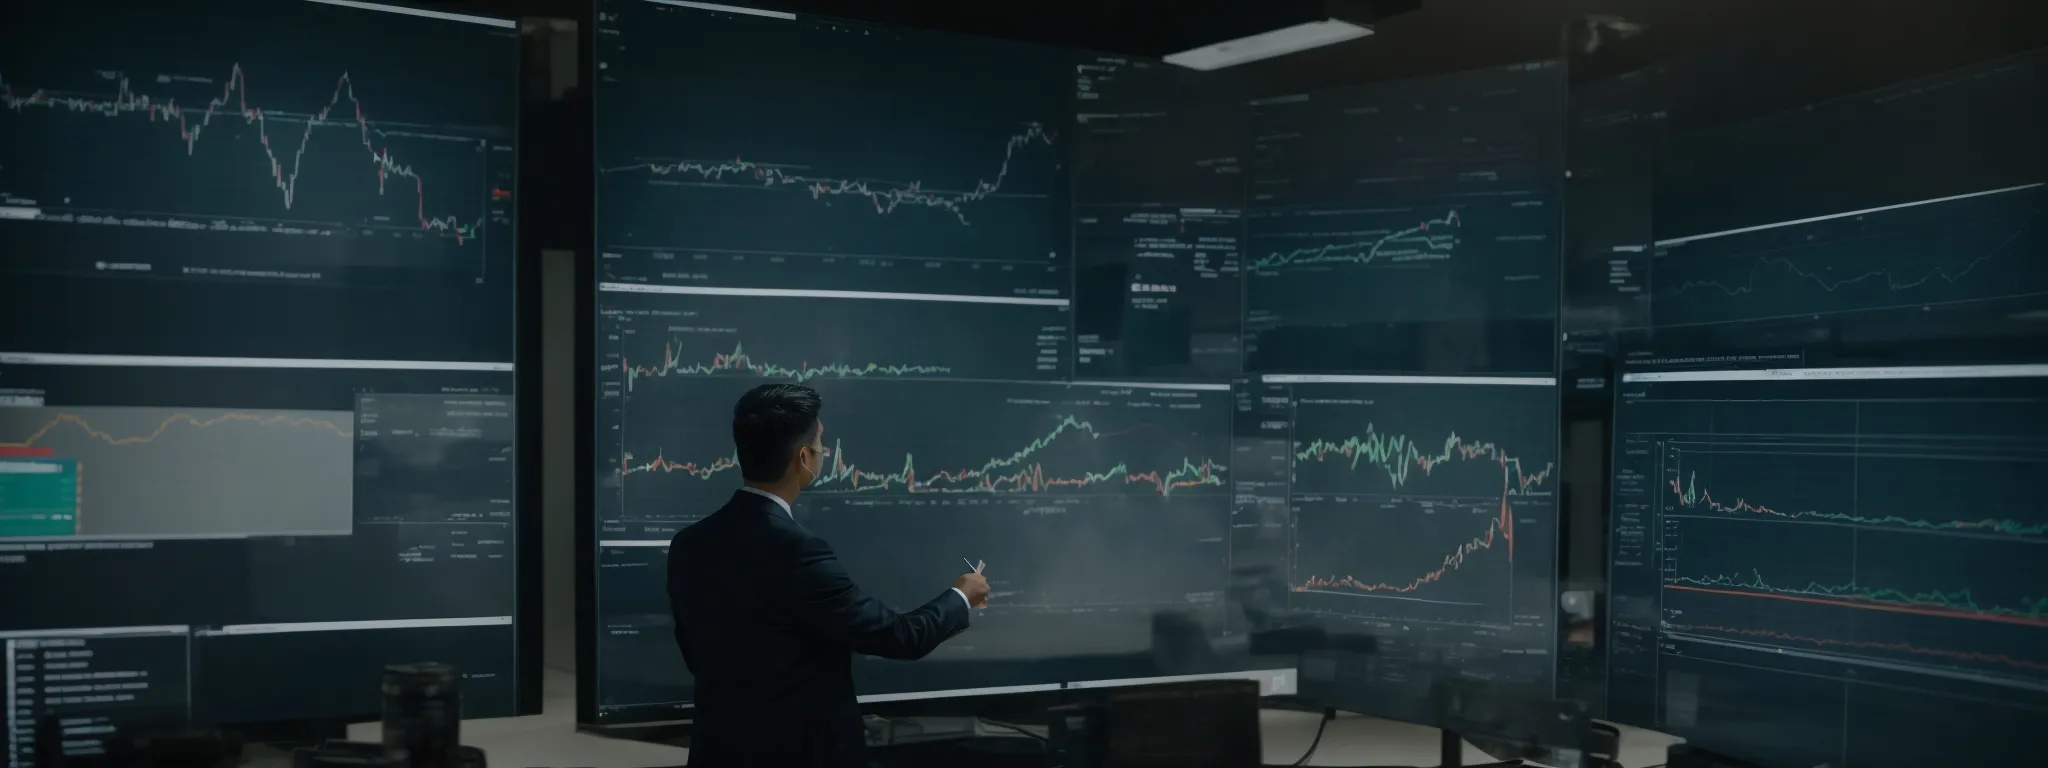 a marketer scrutinizes interactive analytics dashboards on a large screen.